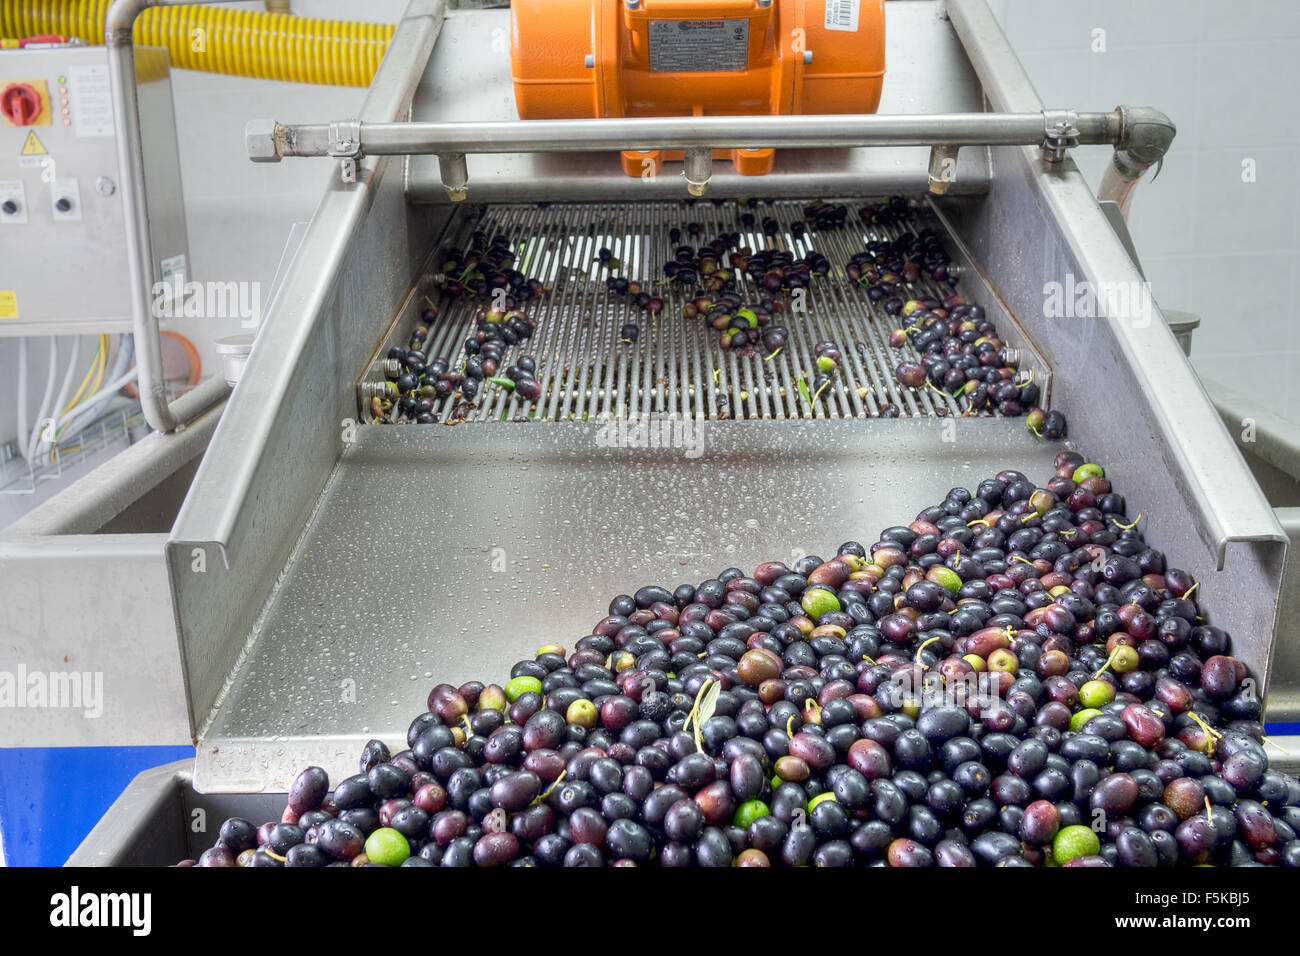 Small scale but modern producer of high quality Extra virgin olive oil. Washed olives arriving prior to pressing etc. Stock Photo